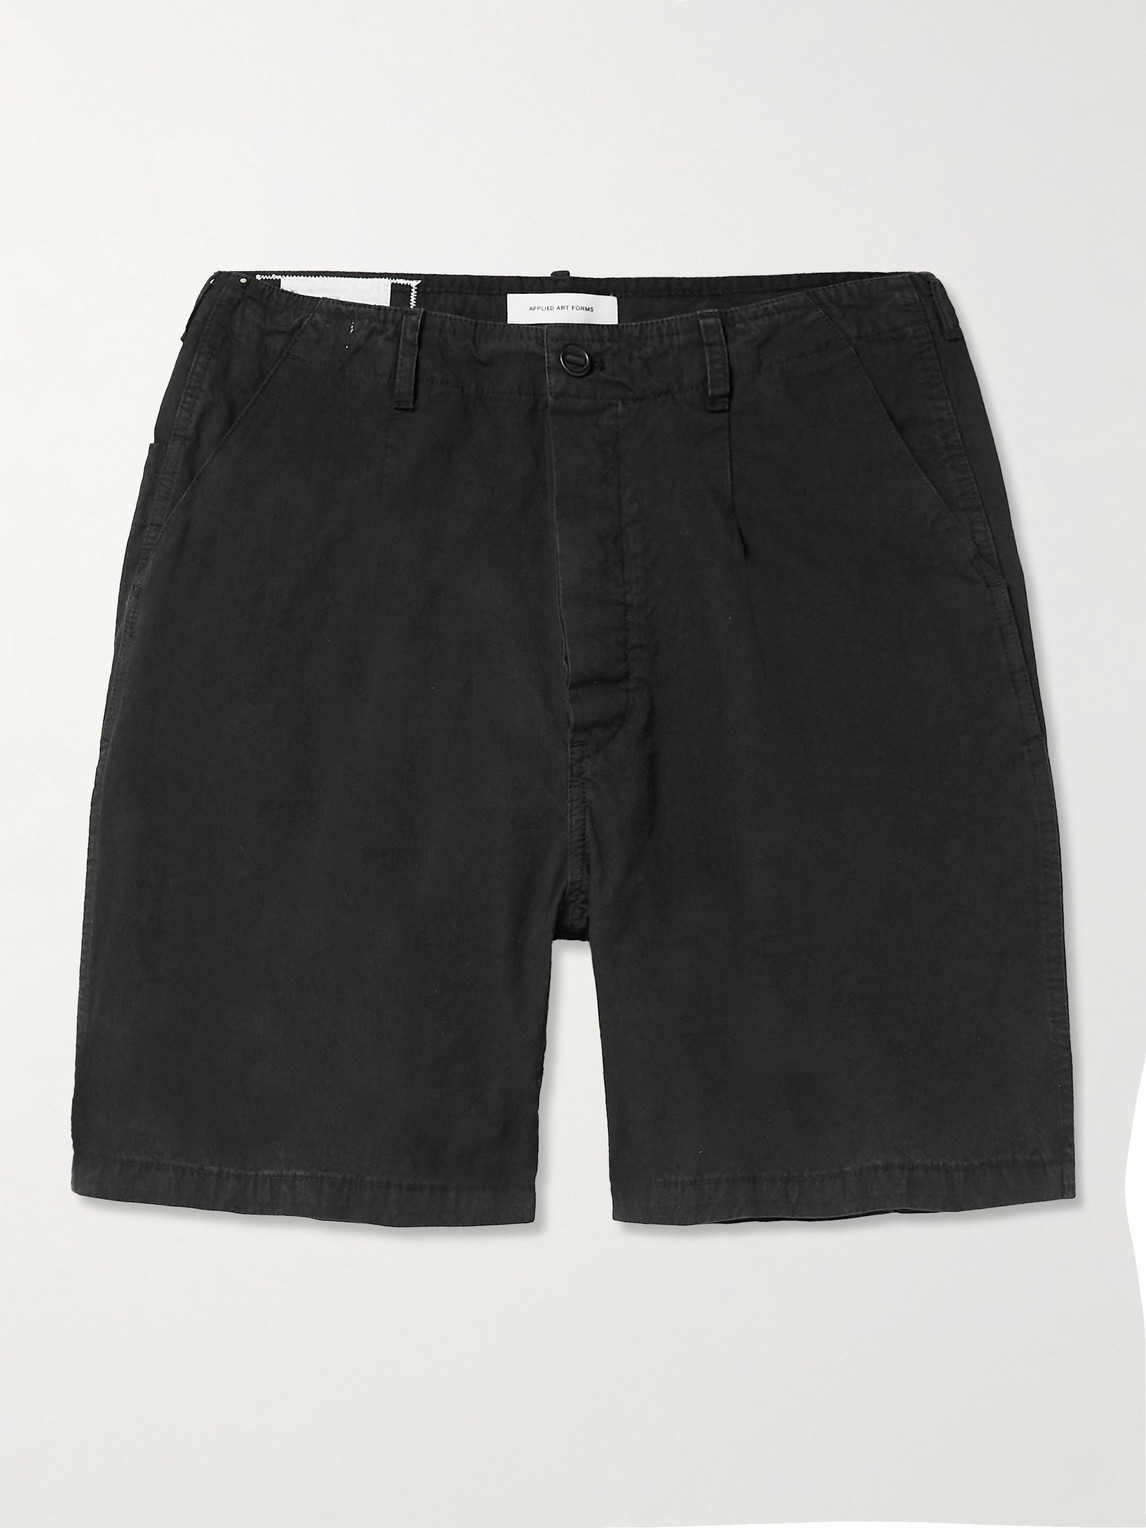 Applied Art Forms Dm3-3 Straight-leg Pleated Cotton And Cordura®-blend Shorts In Black